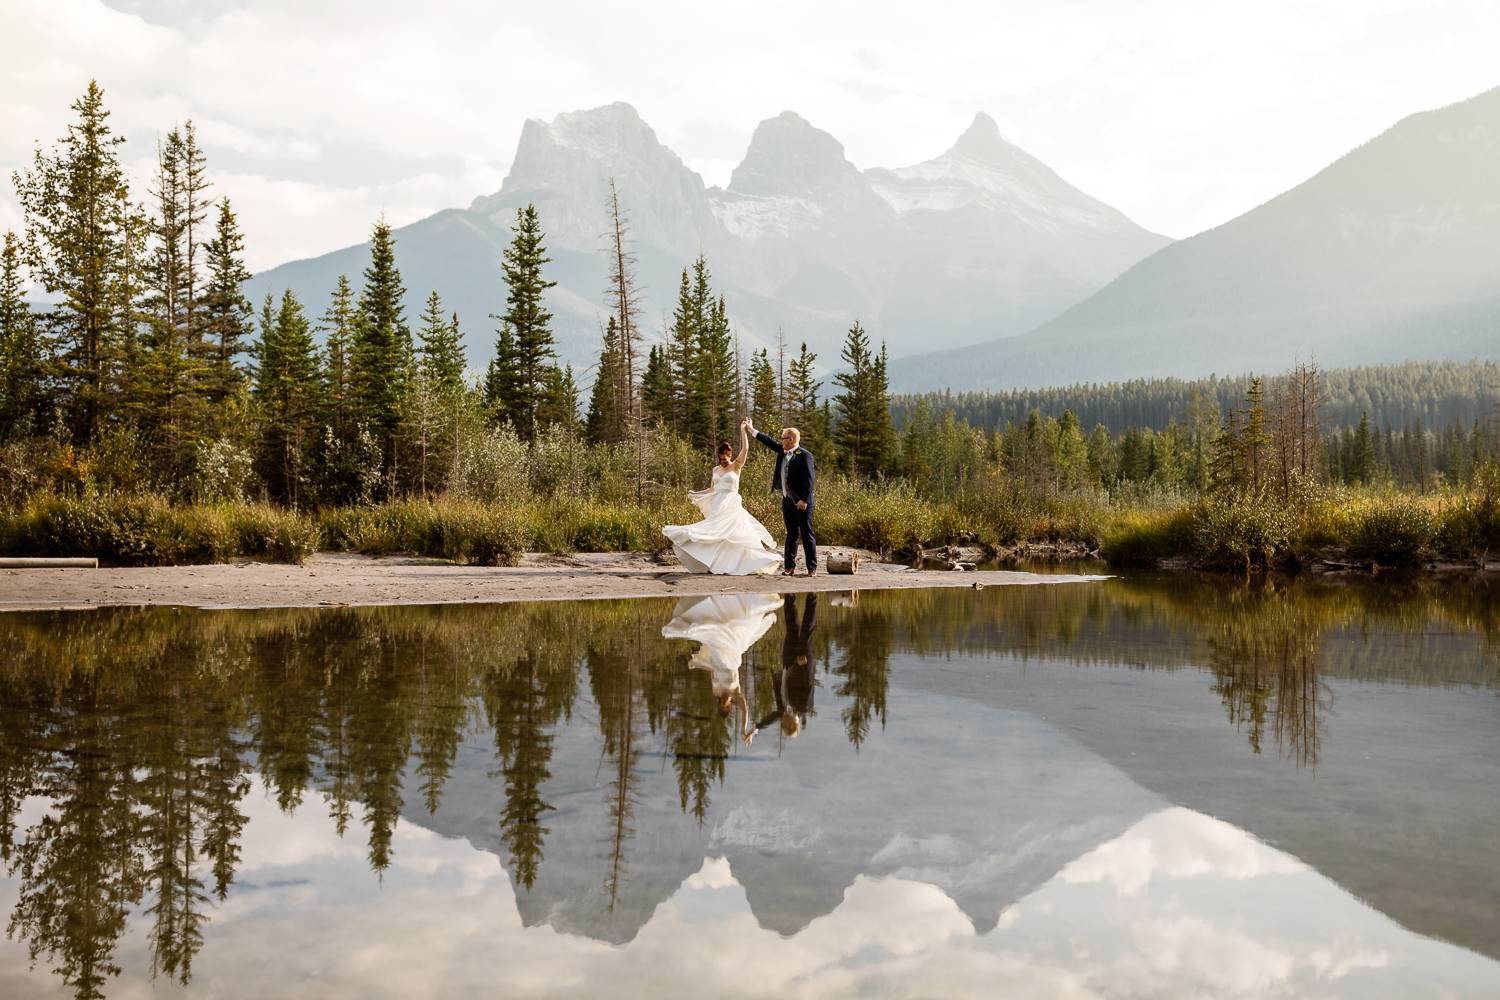 Canmore wedding photographers with the Three Sisters mountains